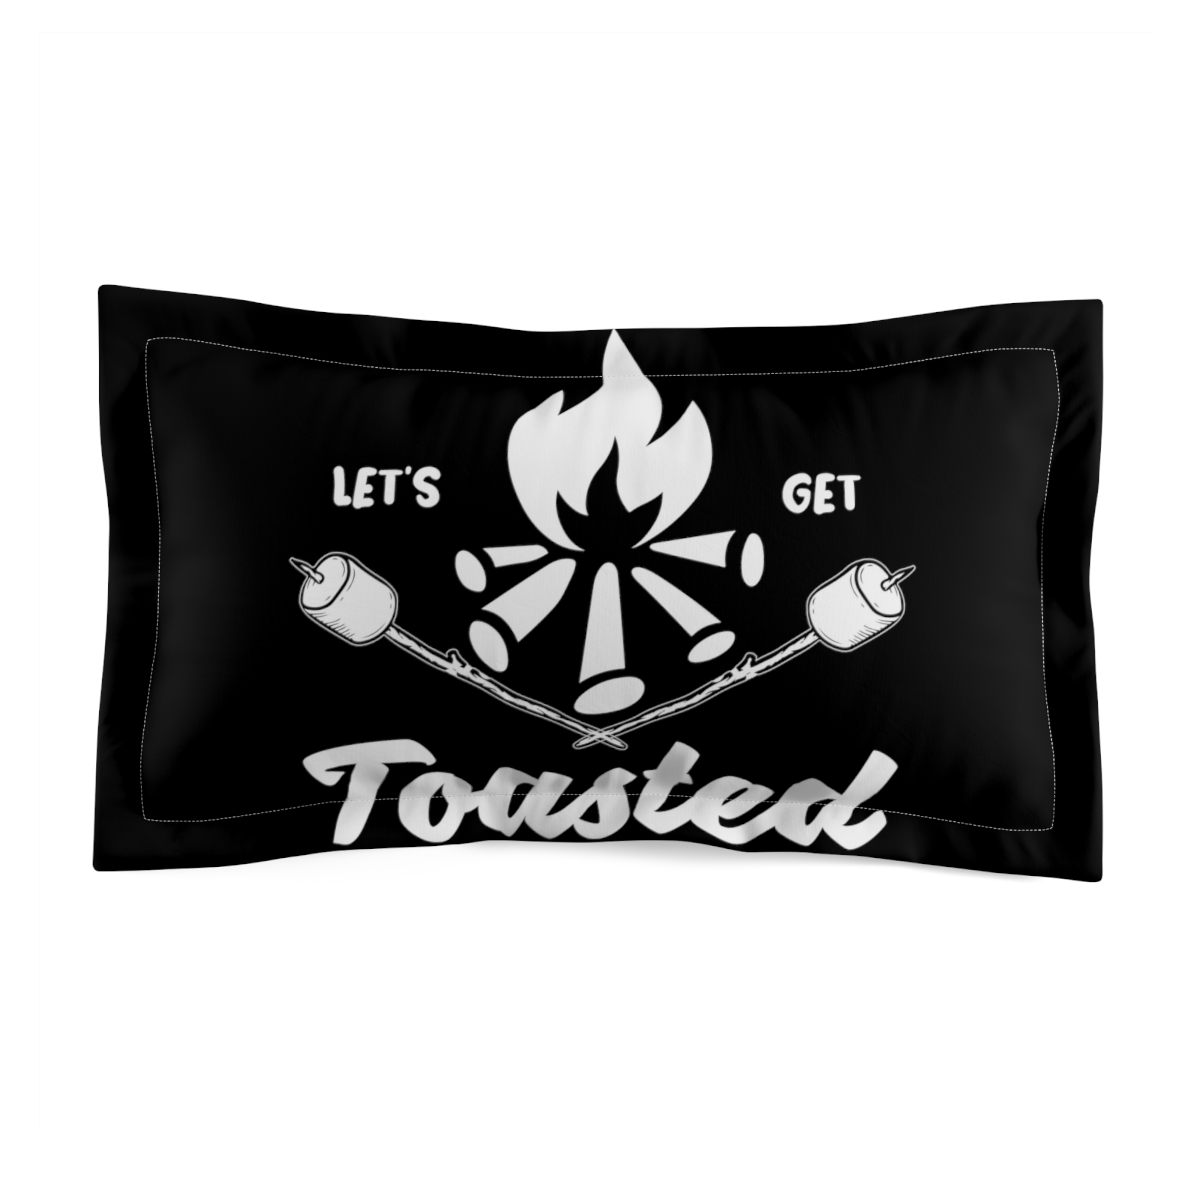 Dreamy Microfiber Pillow Sham: Black and White Campfire 'Let's Get Toasted' Prin - $32.96 - $35.02